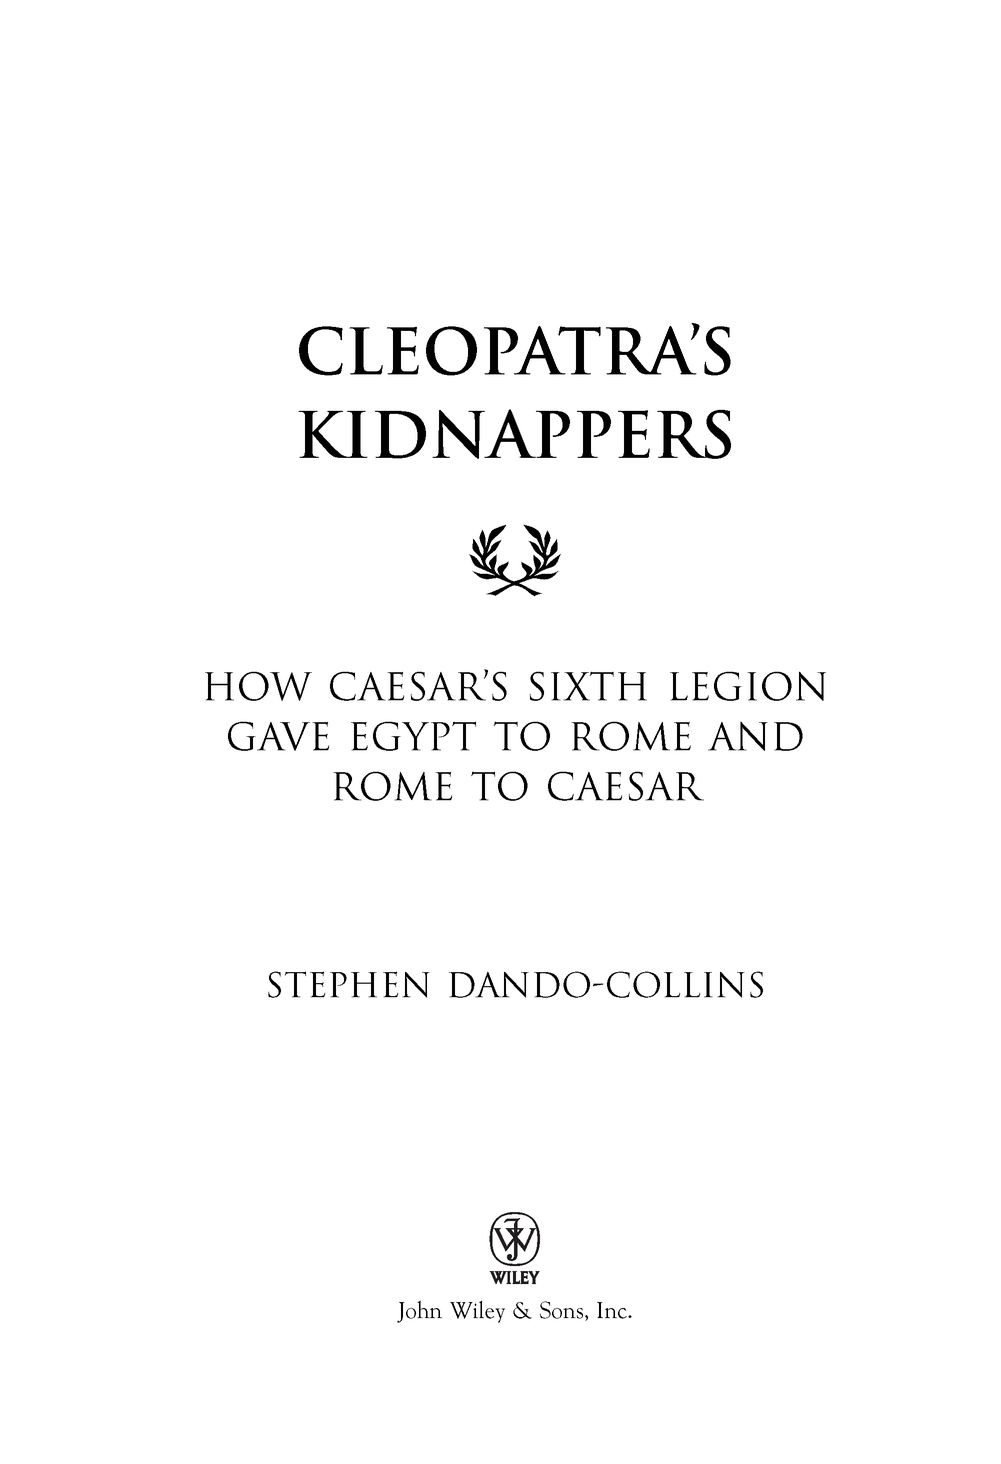 Cleopatras Kidnappers How Caesar s Sixth Legion Gave Egypt to Rome and Rome to Caesar - image 2